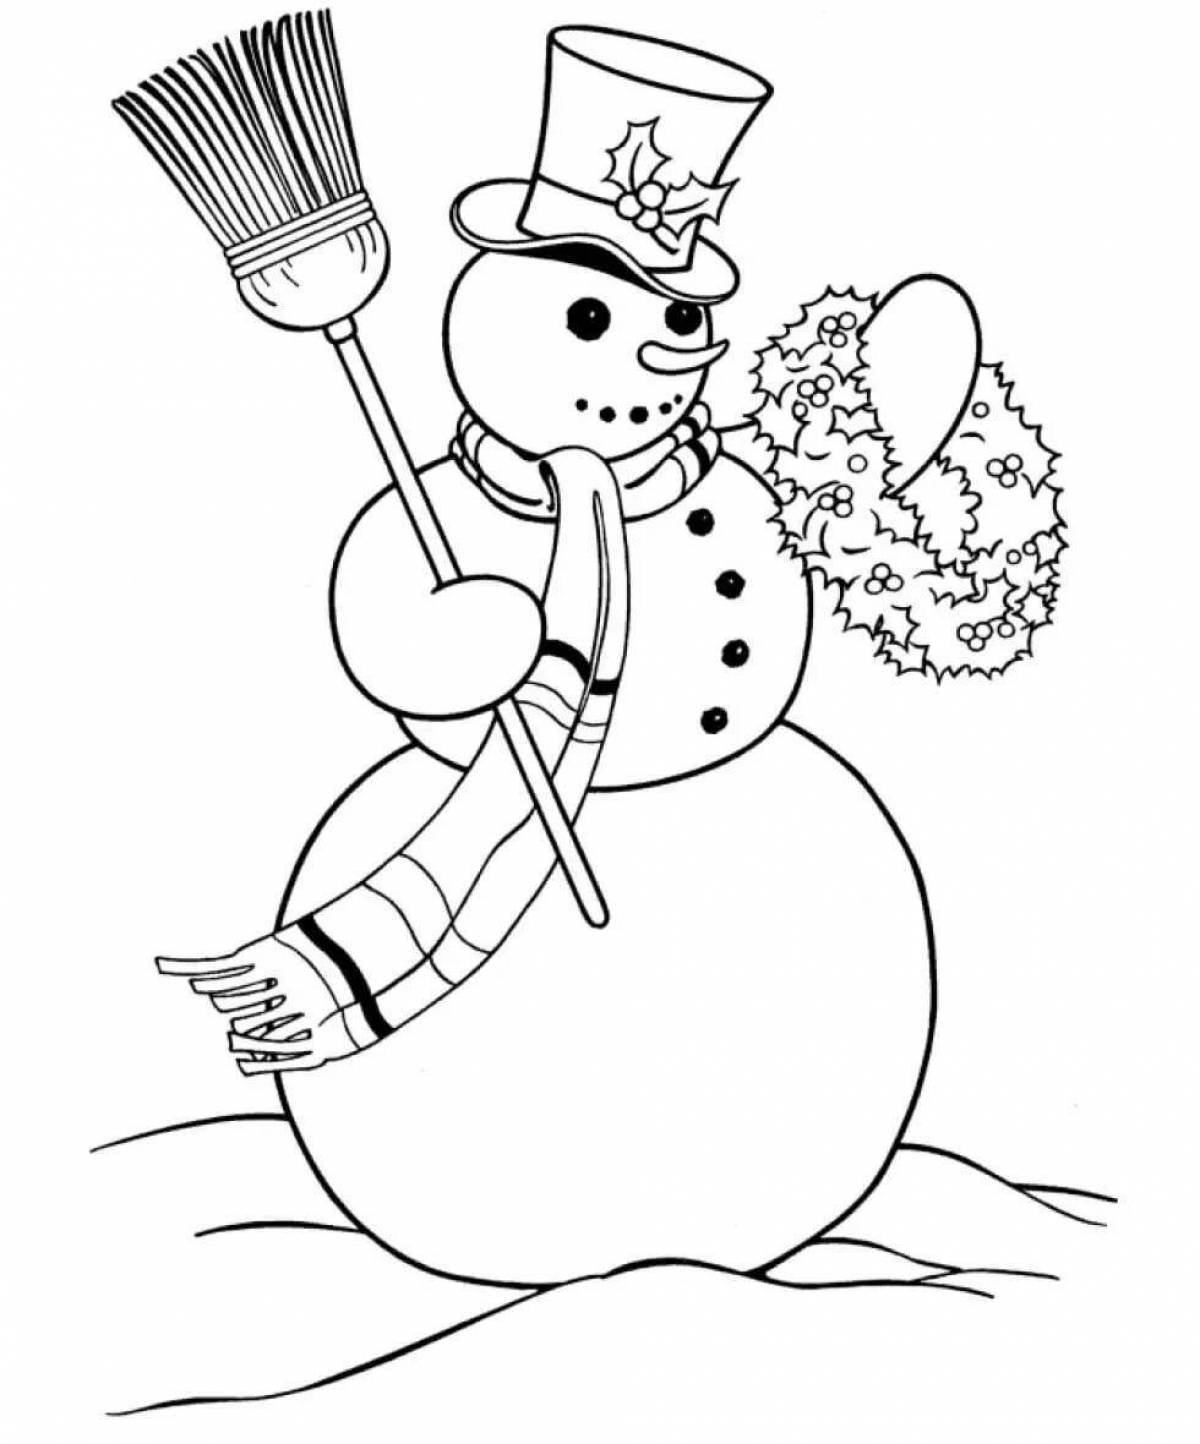 Adorable snowman coloring book for kids 6-7 years old